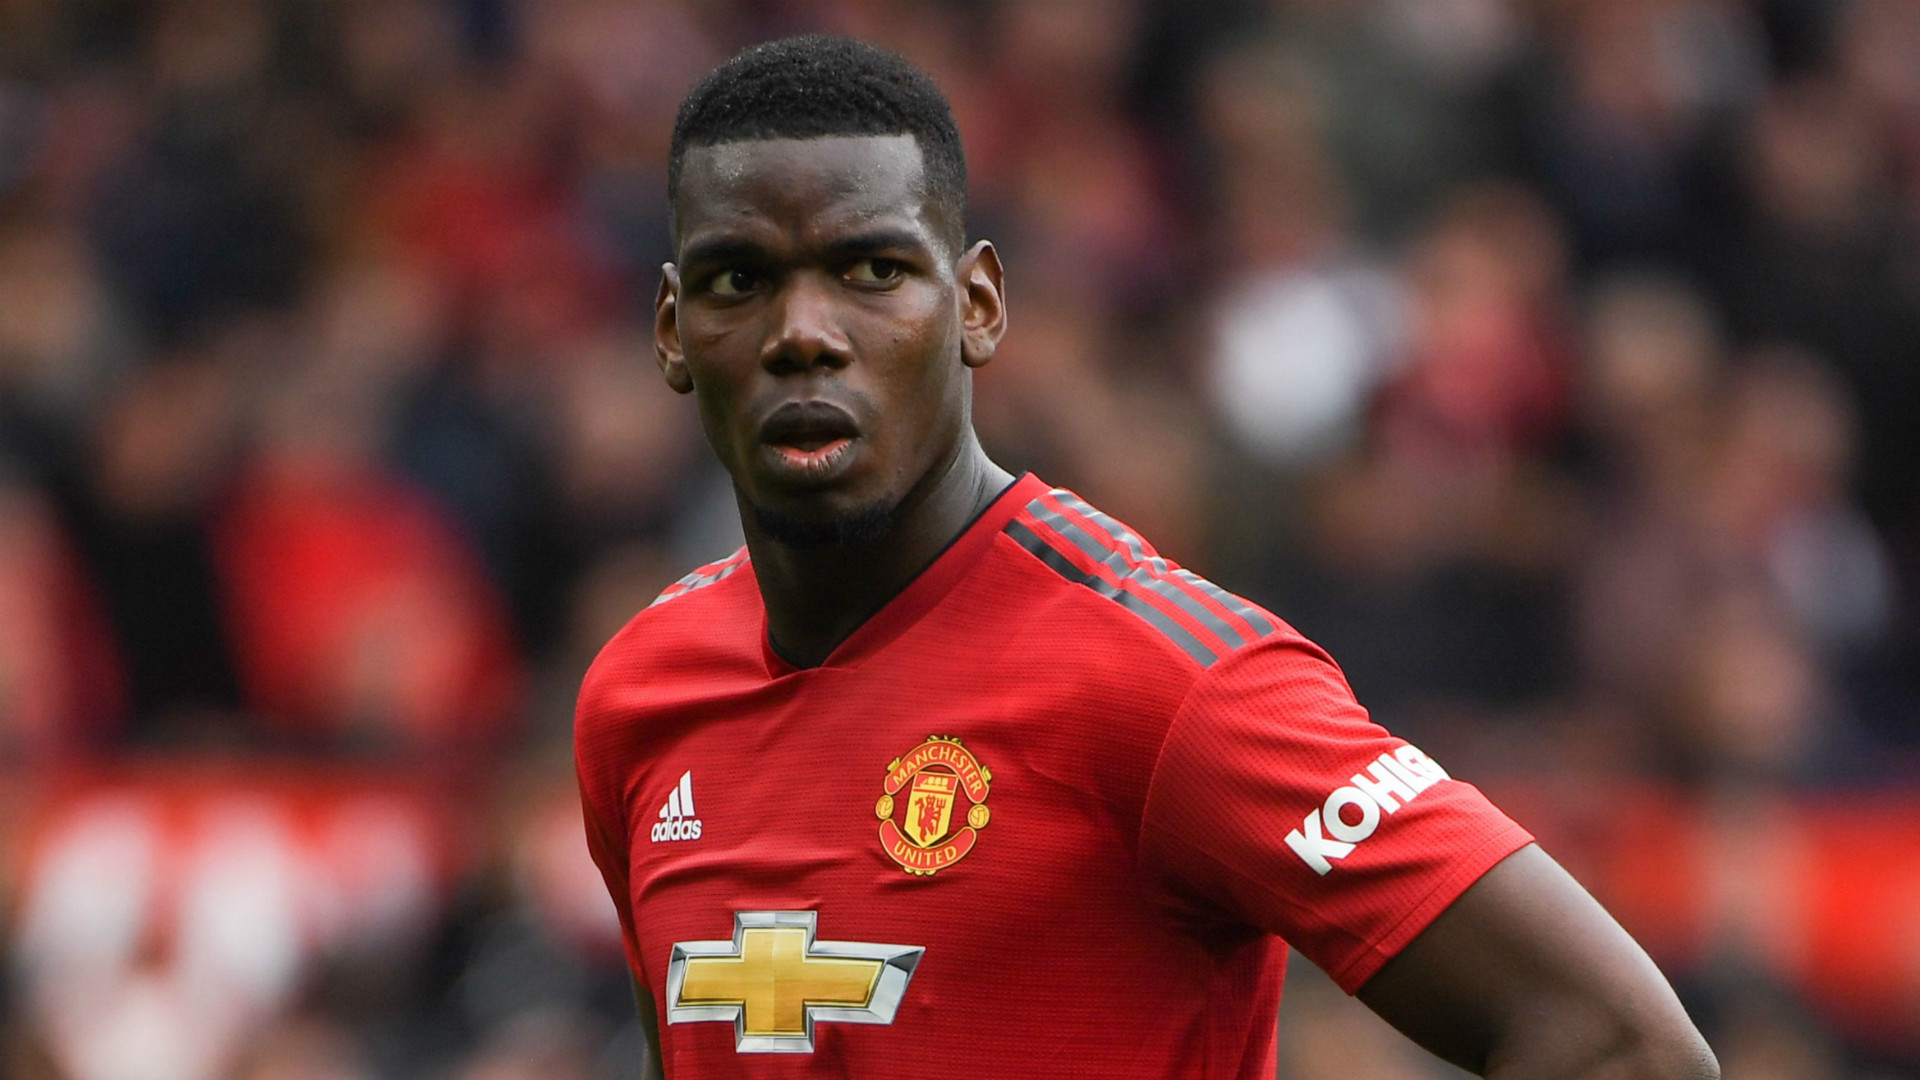 Zinedine Zidane and Real Madrid at odds over signing Paul Pogba